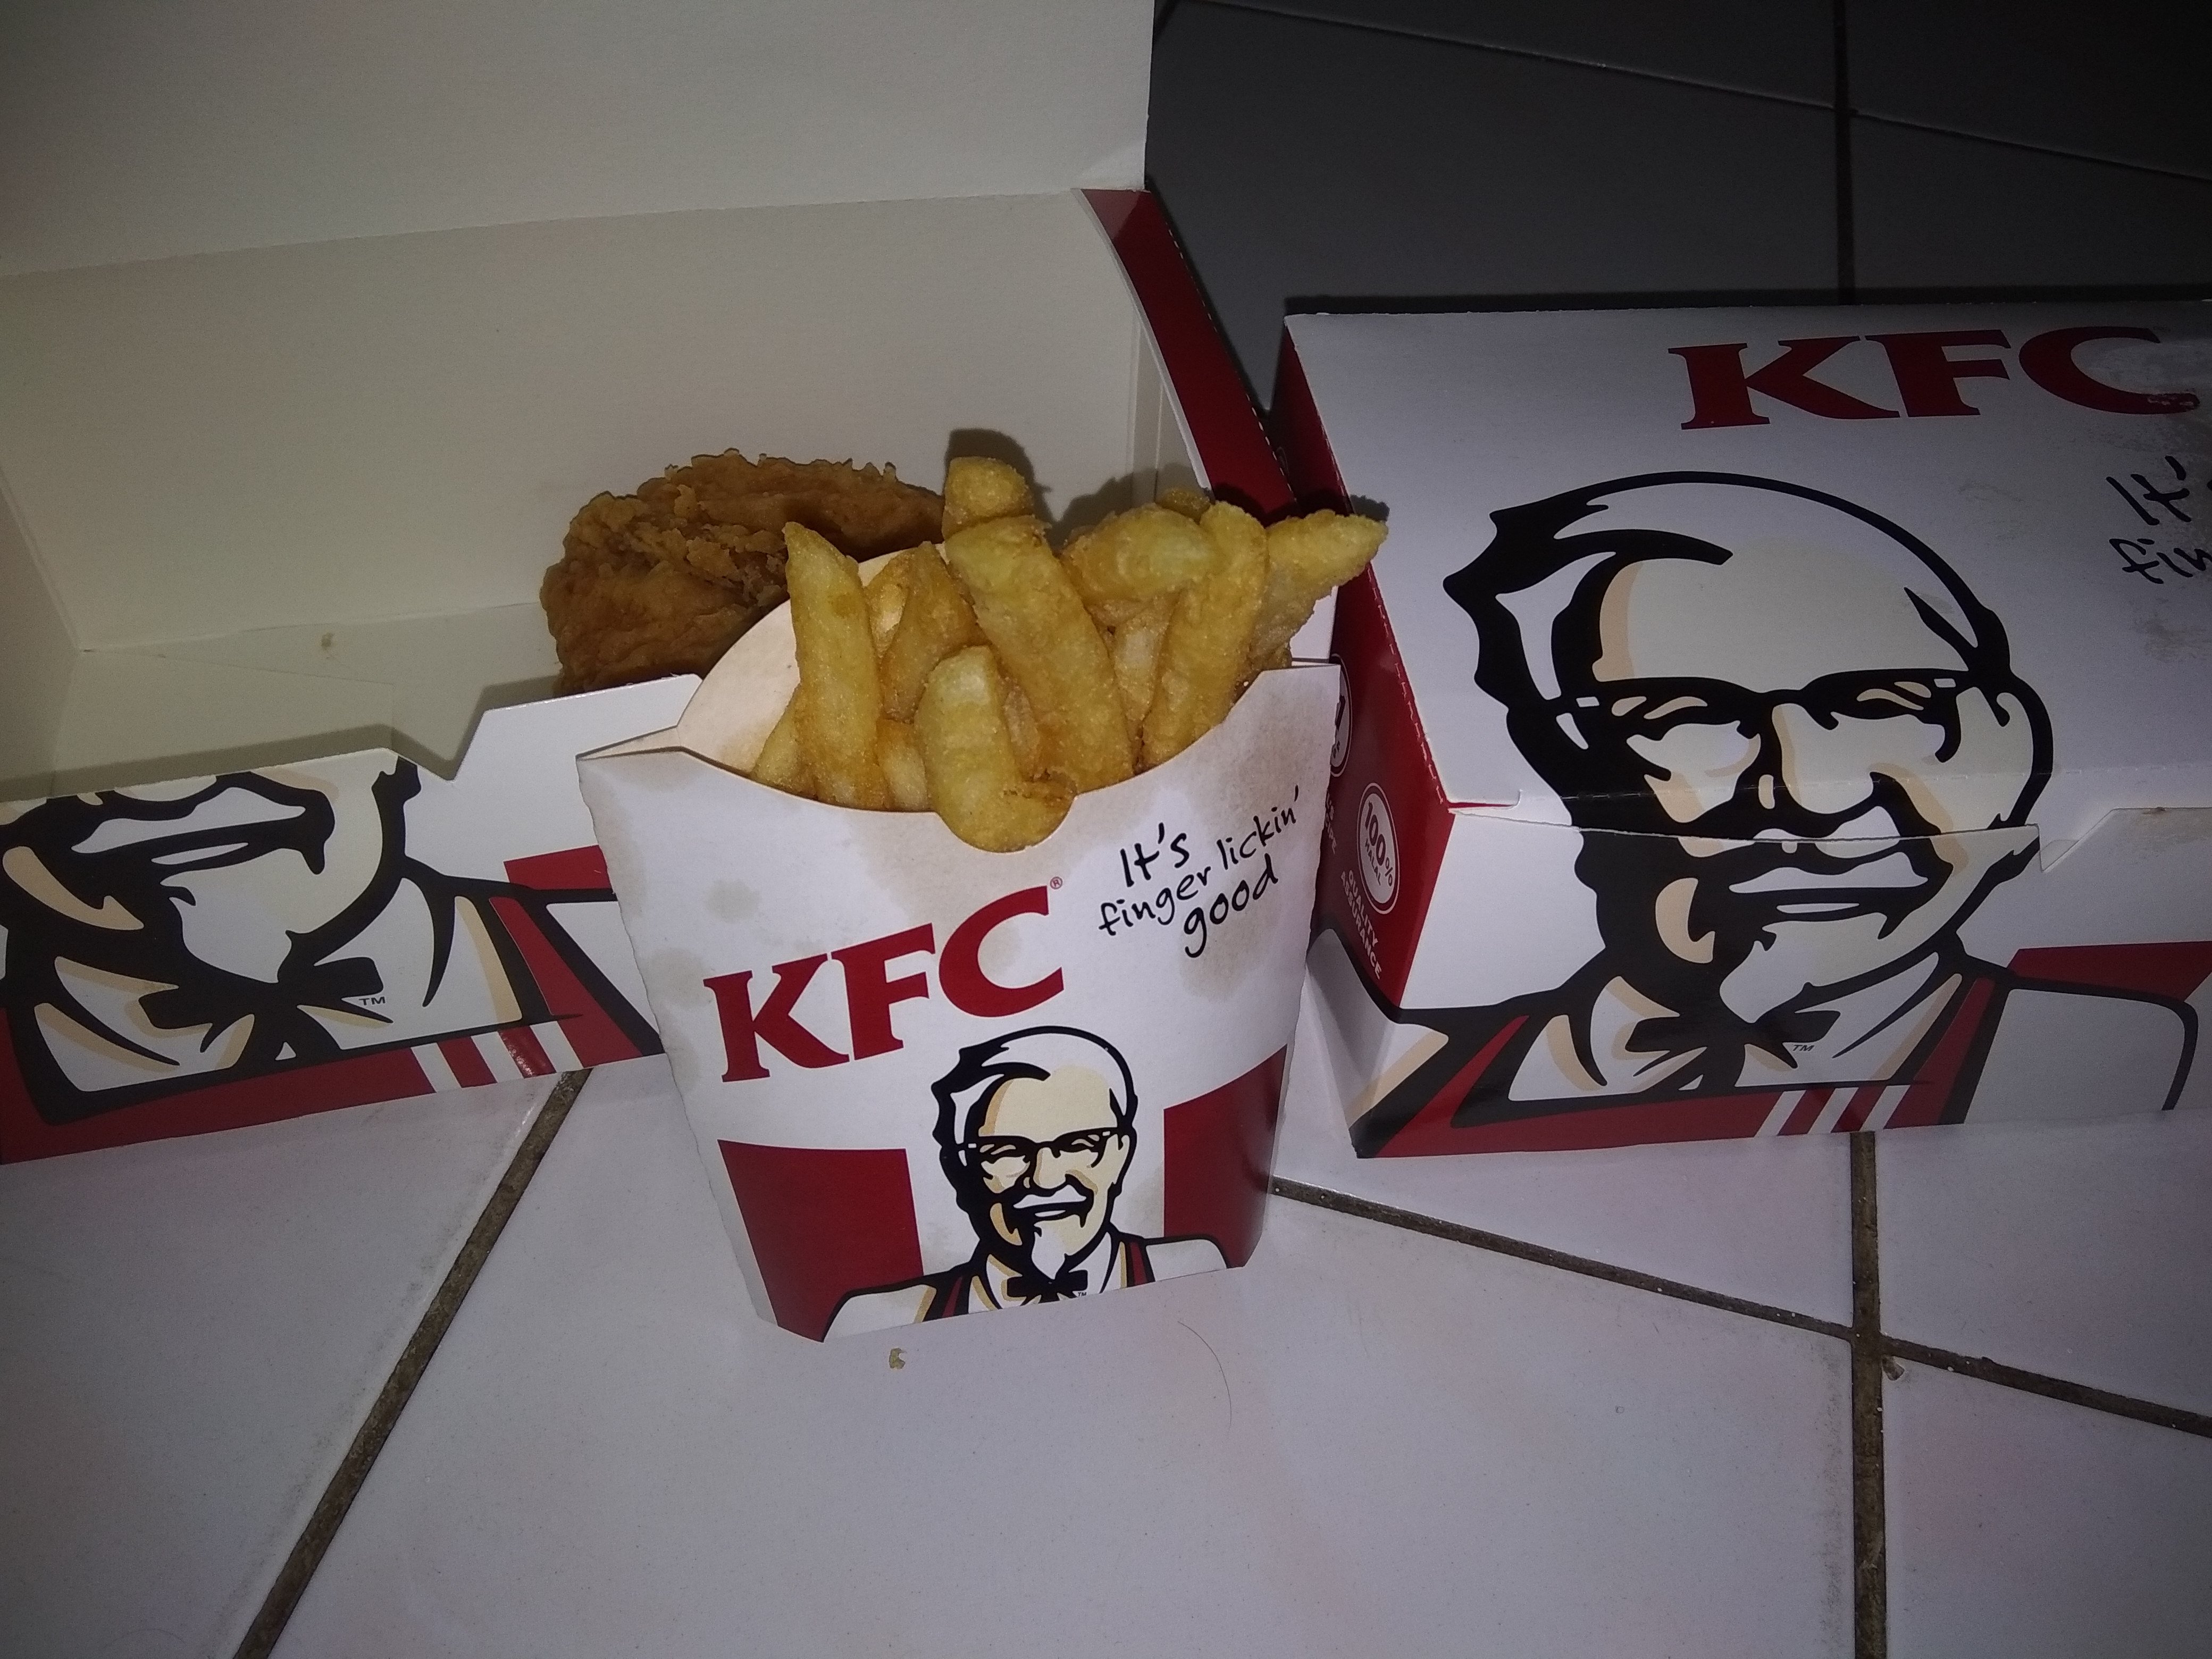 KFC (Kentucky Fried Chicken) is one of the world's largest restaurant ...